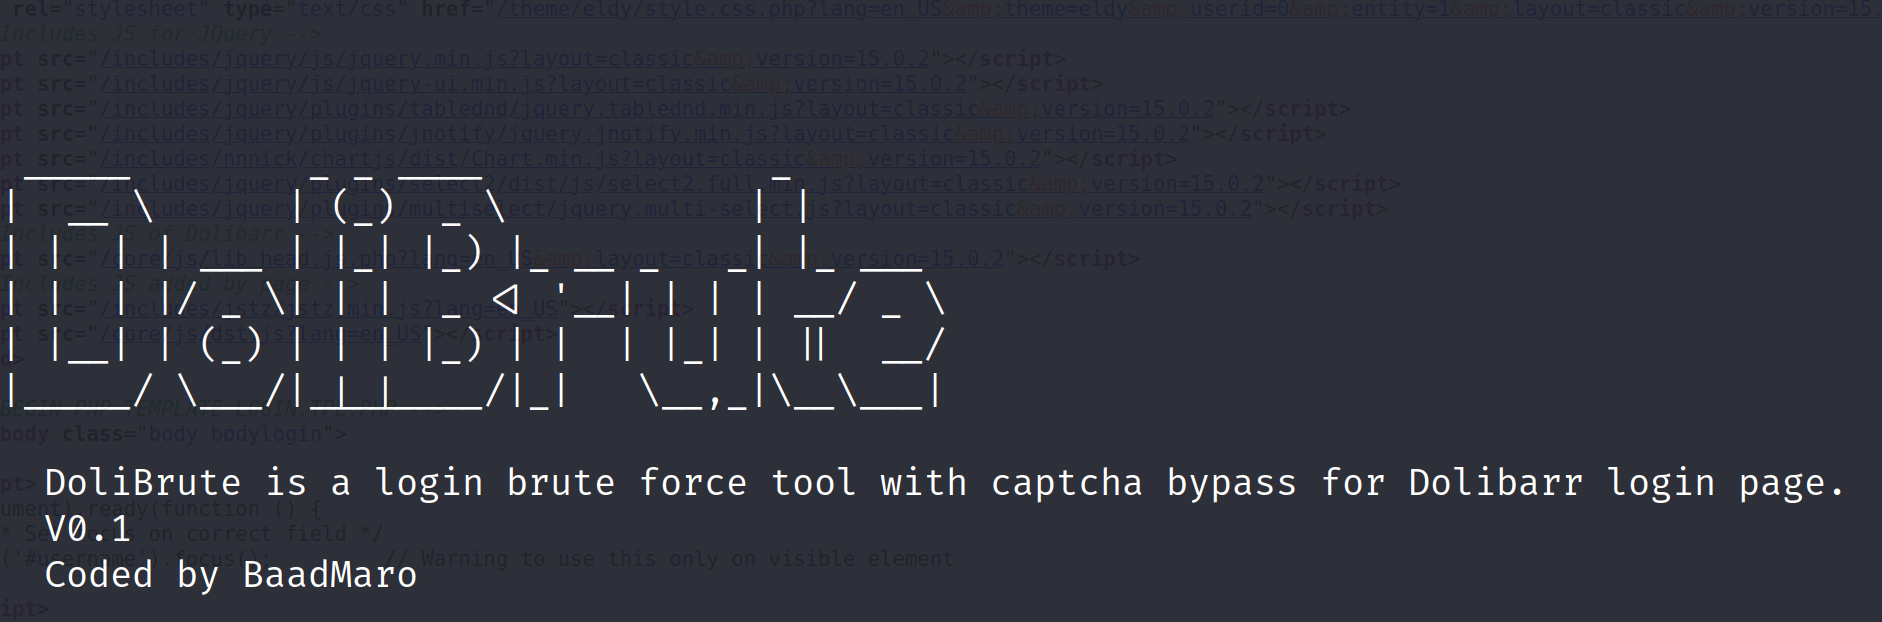 Bypass captcha using OCR on Dolibarr login page image